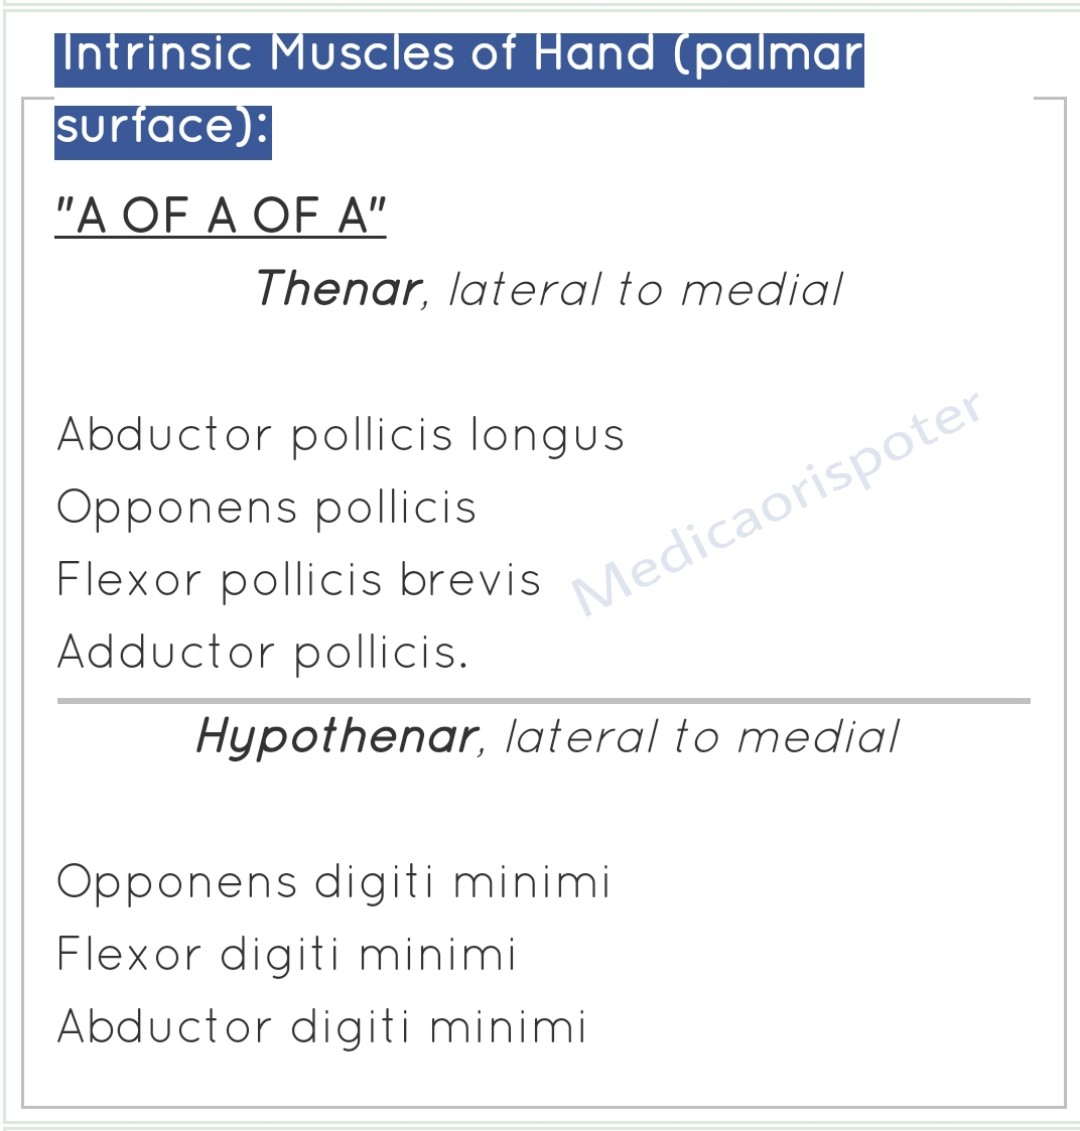 Intrinsic Muscles of the Hand Palmer Surface